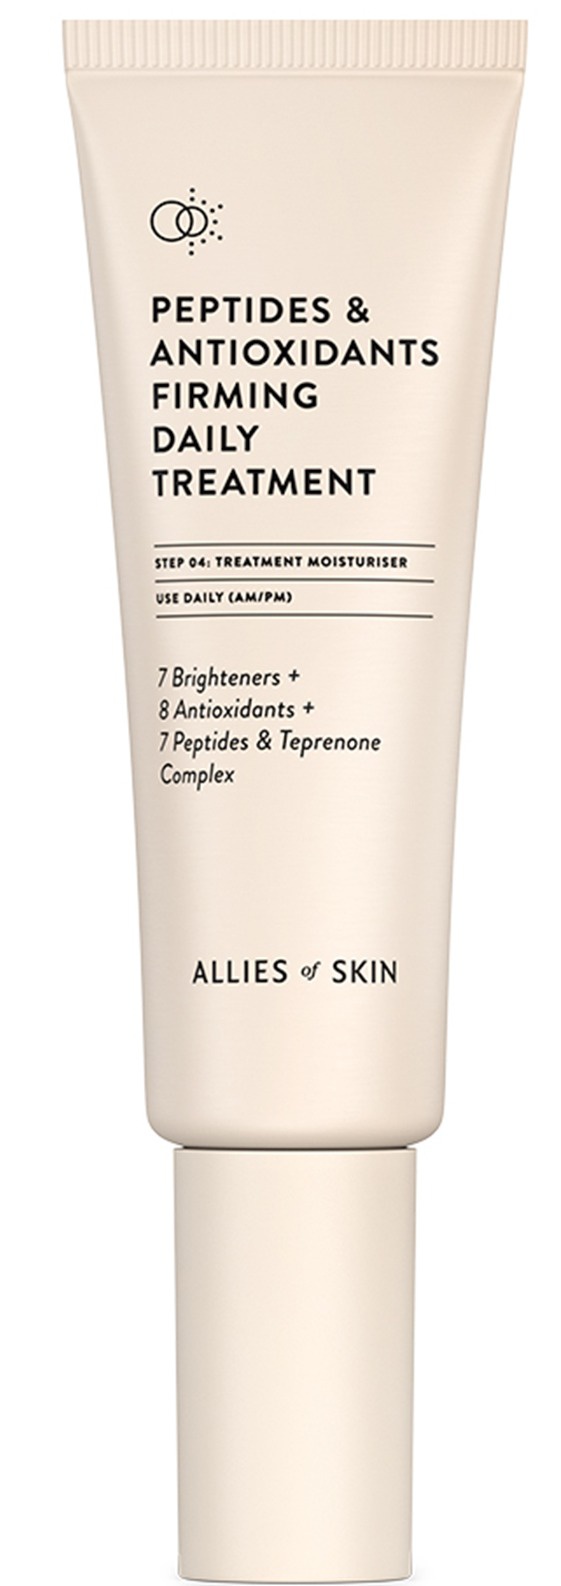 Allies of Skin Peptides Antioxidants Firming Daily Treatment